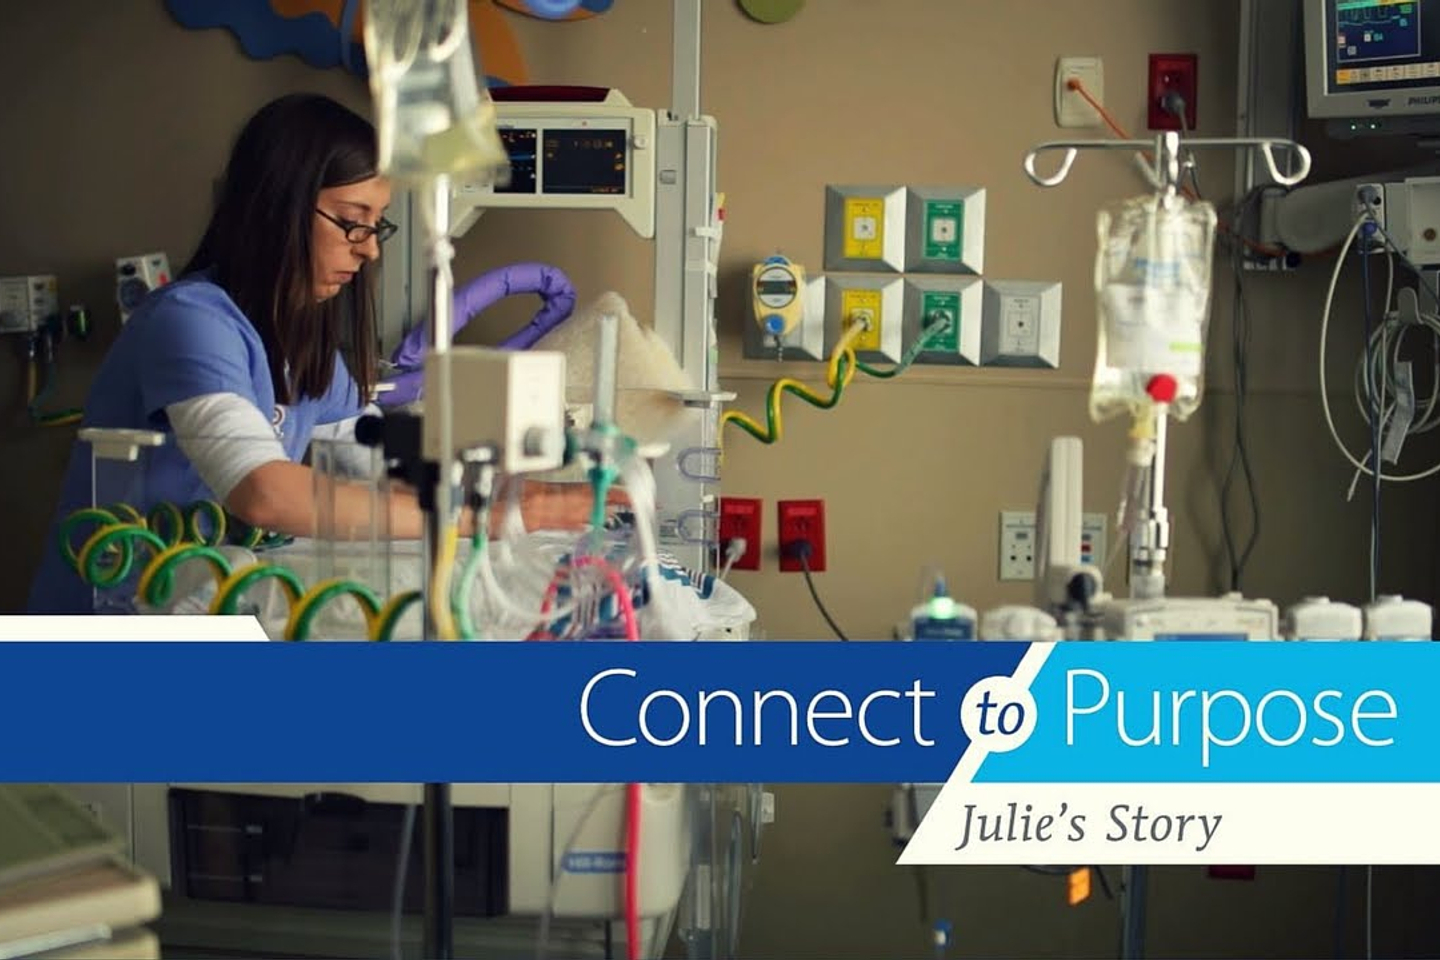 NICU Nurse Julie Freeman leans over an incubator. Connect to Purpose, Julie's Story.